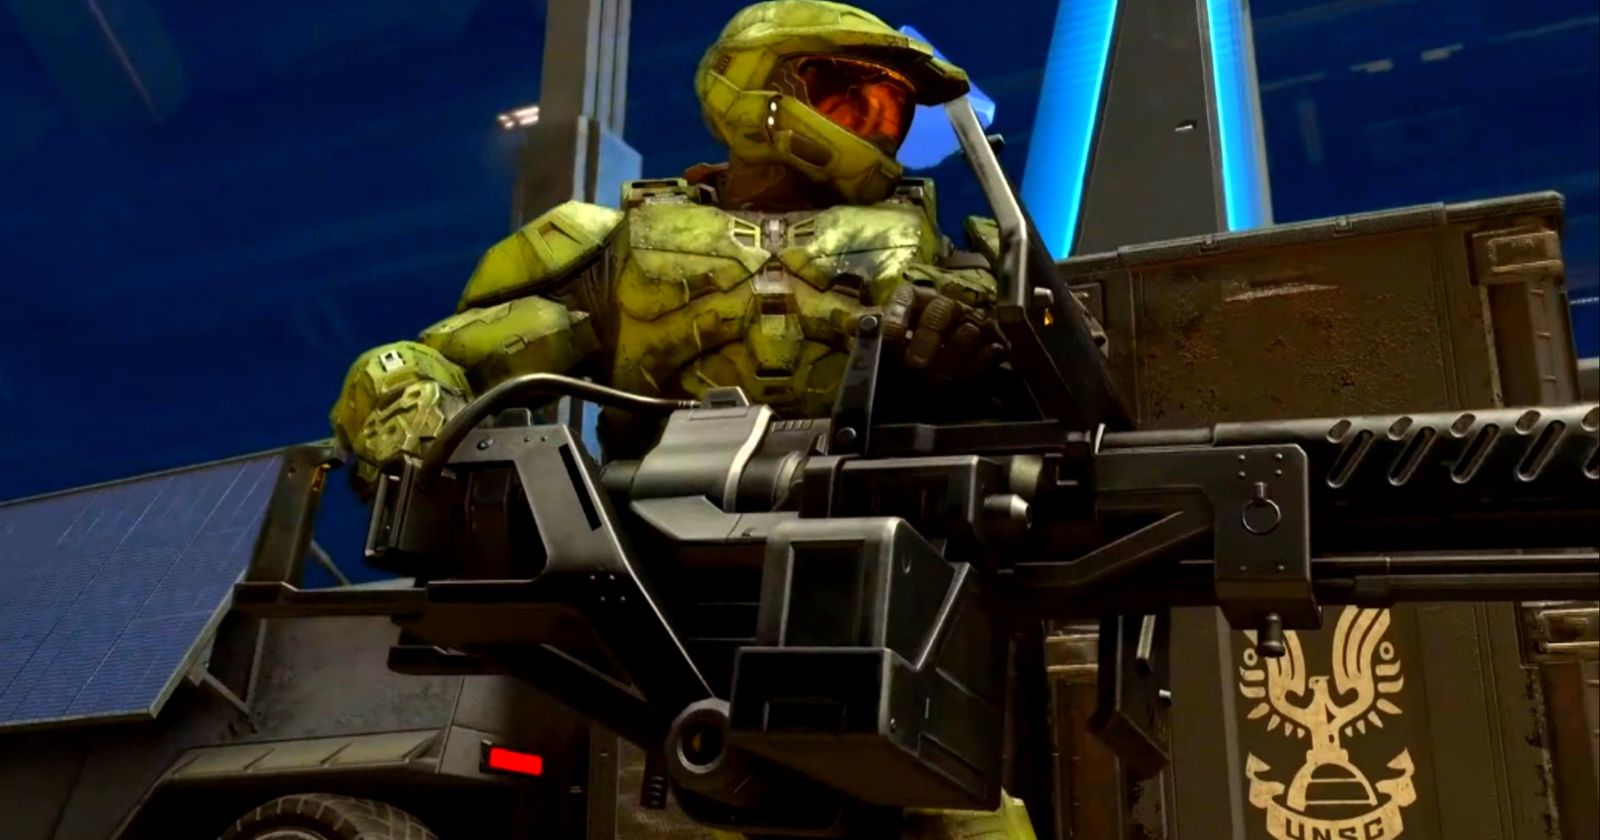 It's Finally Time To Give Halo Infinite Its Due